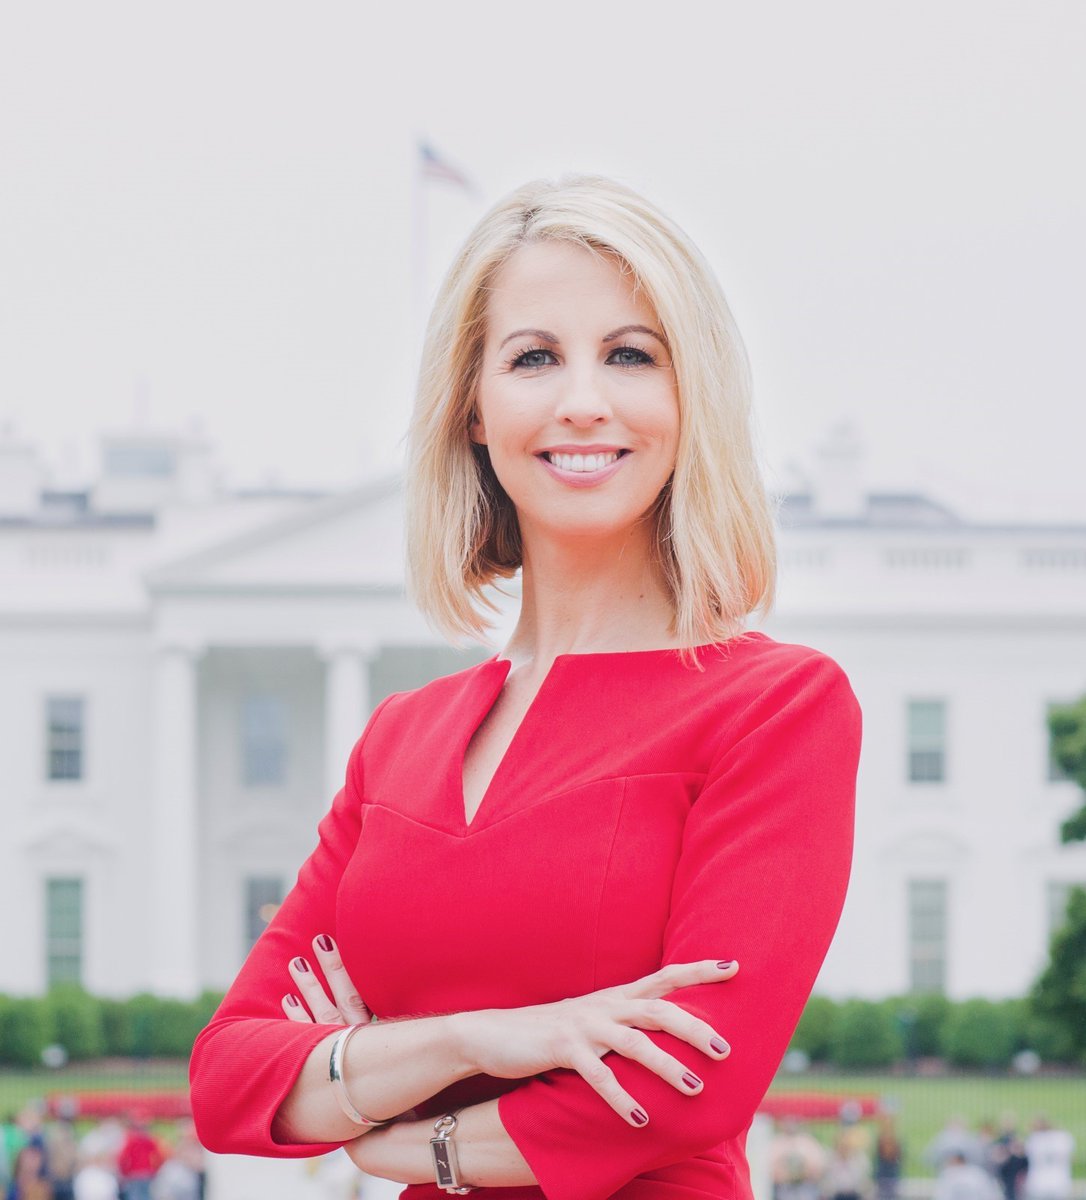 JUST ANNOUNCED ➡️The @BBC has appointed @CaitrionaPerry as chief presenter on the @BBCNews channel, joining @SumangaliS on the Washington D.C news desk. Welcome, Caitriona! Read more: bit.ly/3Vxj8a0